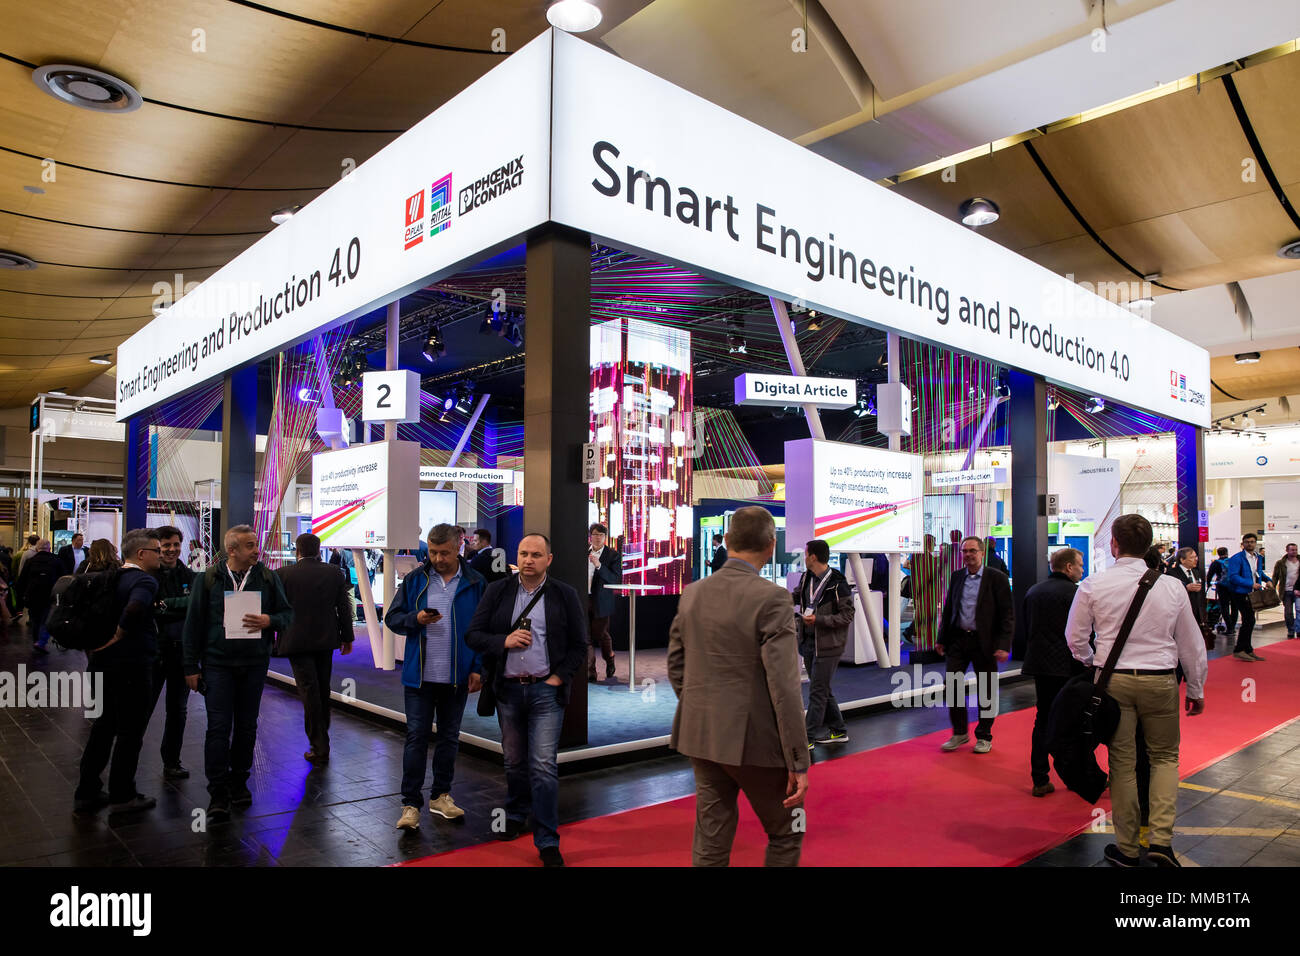 Hannover, Germany - April, 2018: Smart engineering and production 4.0 booth stand on Messe fair in Hannover, Germany Stock Photo